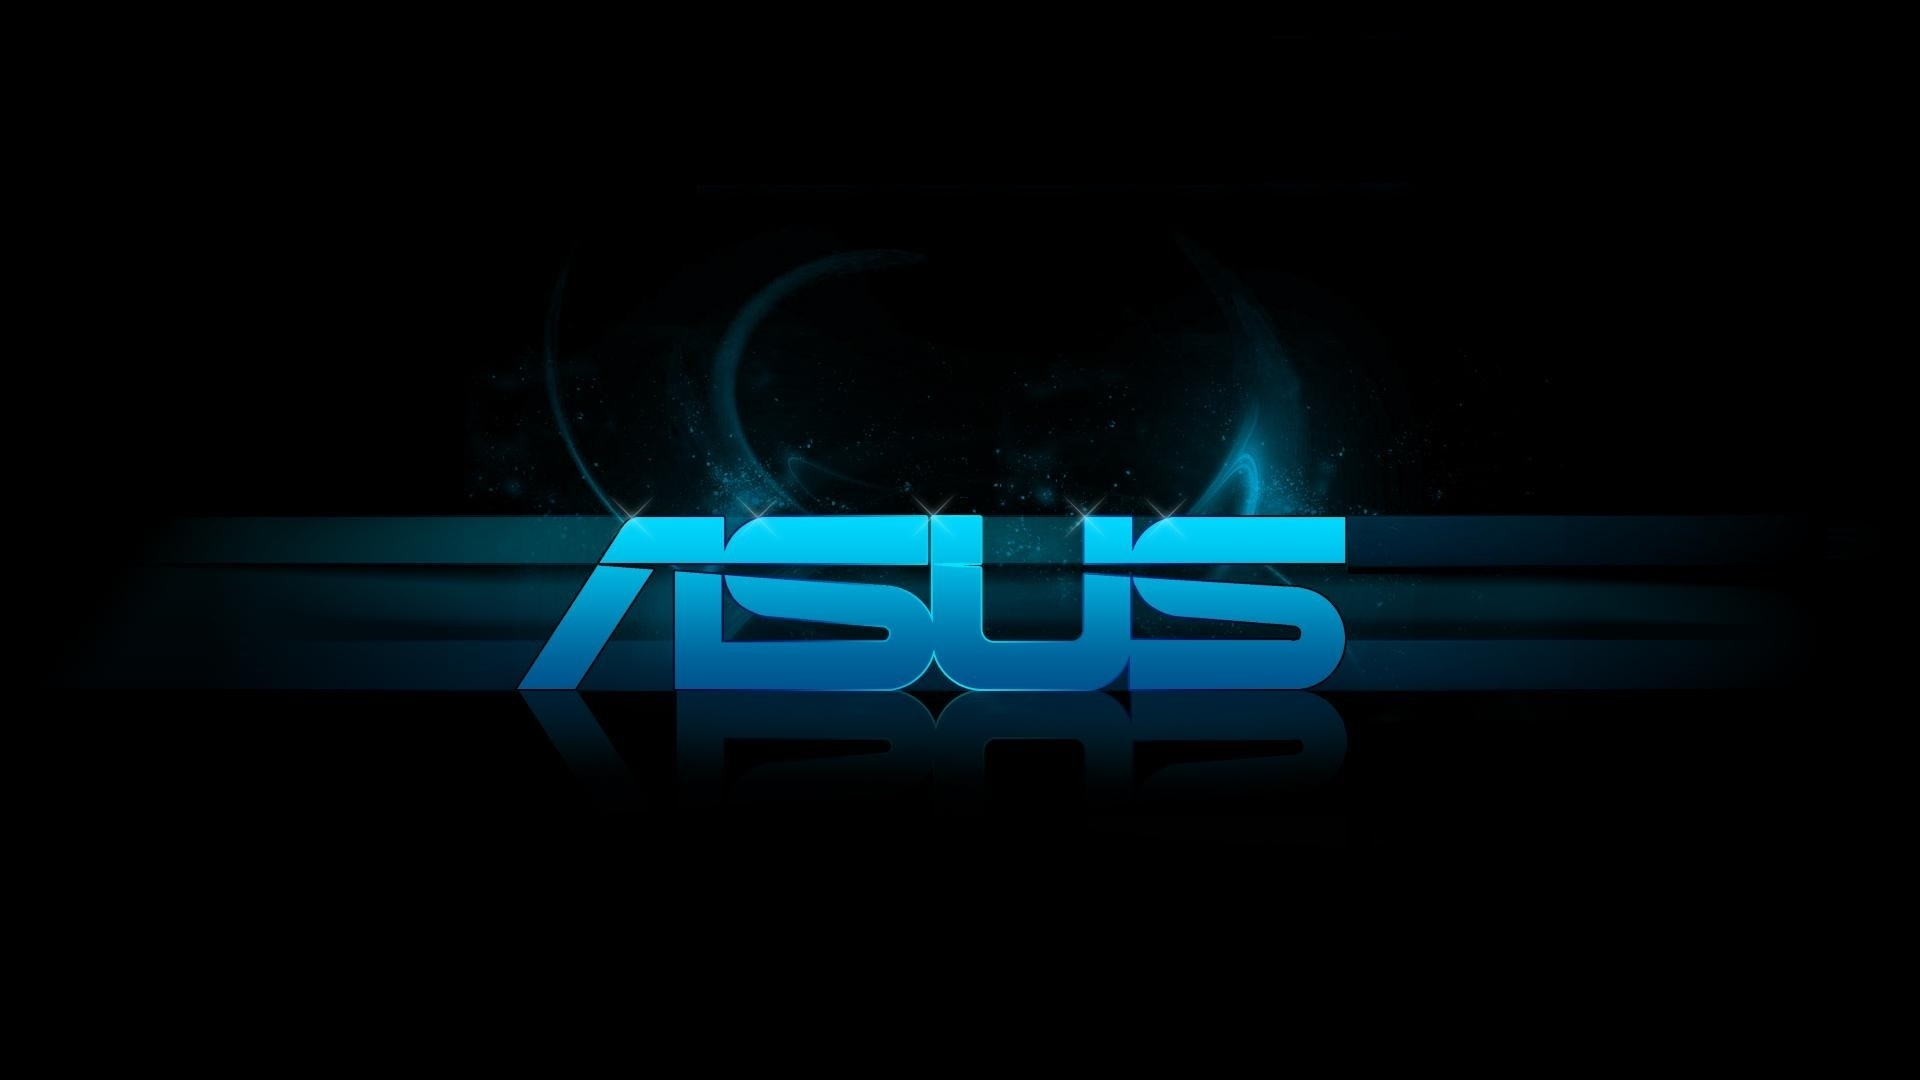 shareon, no advertisment, blue, asus